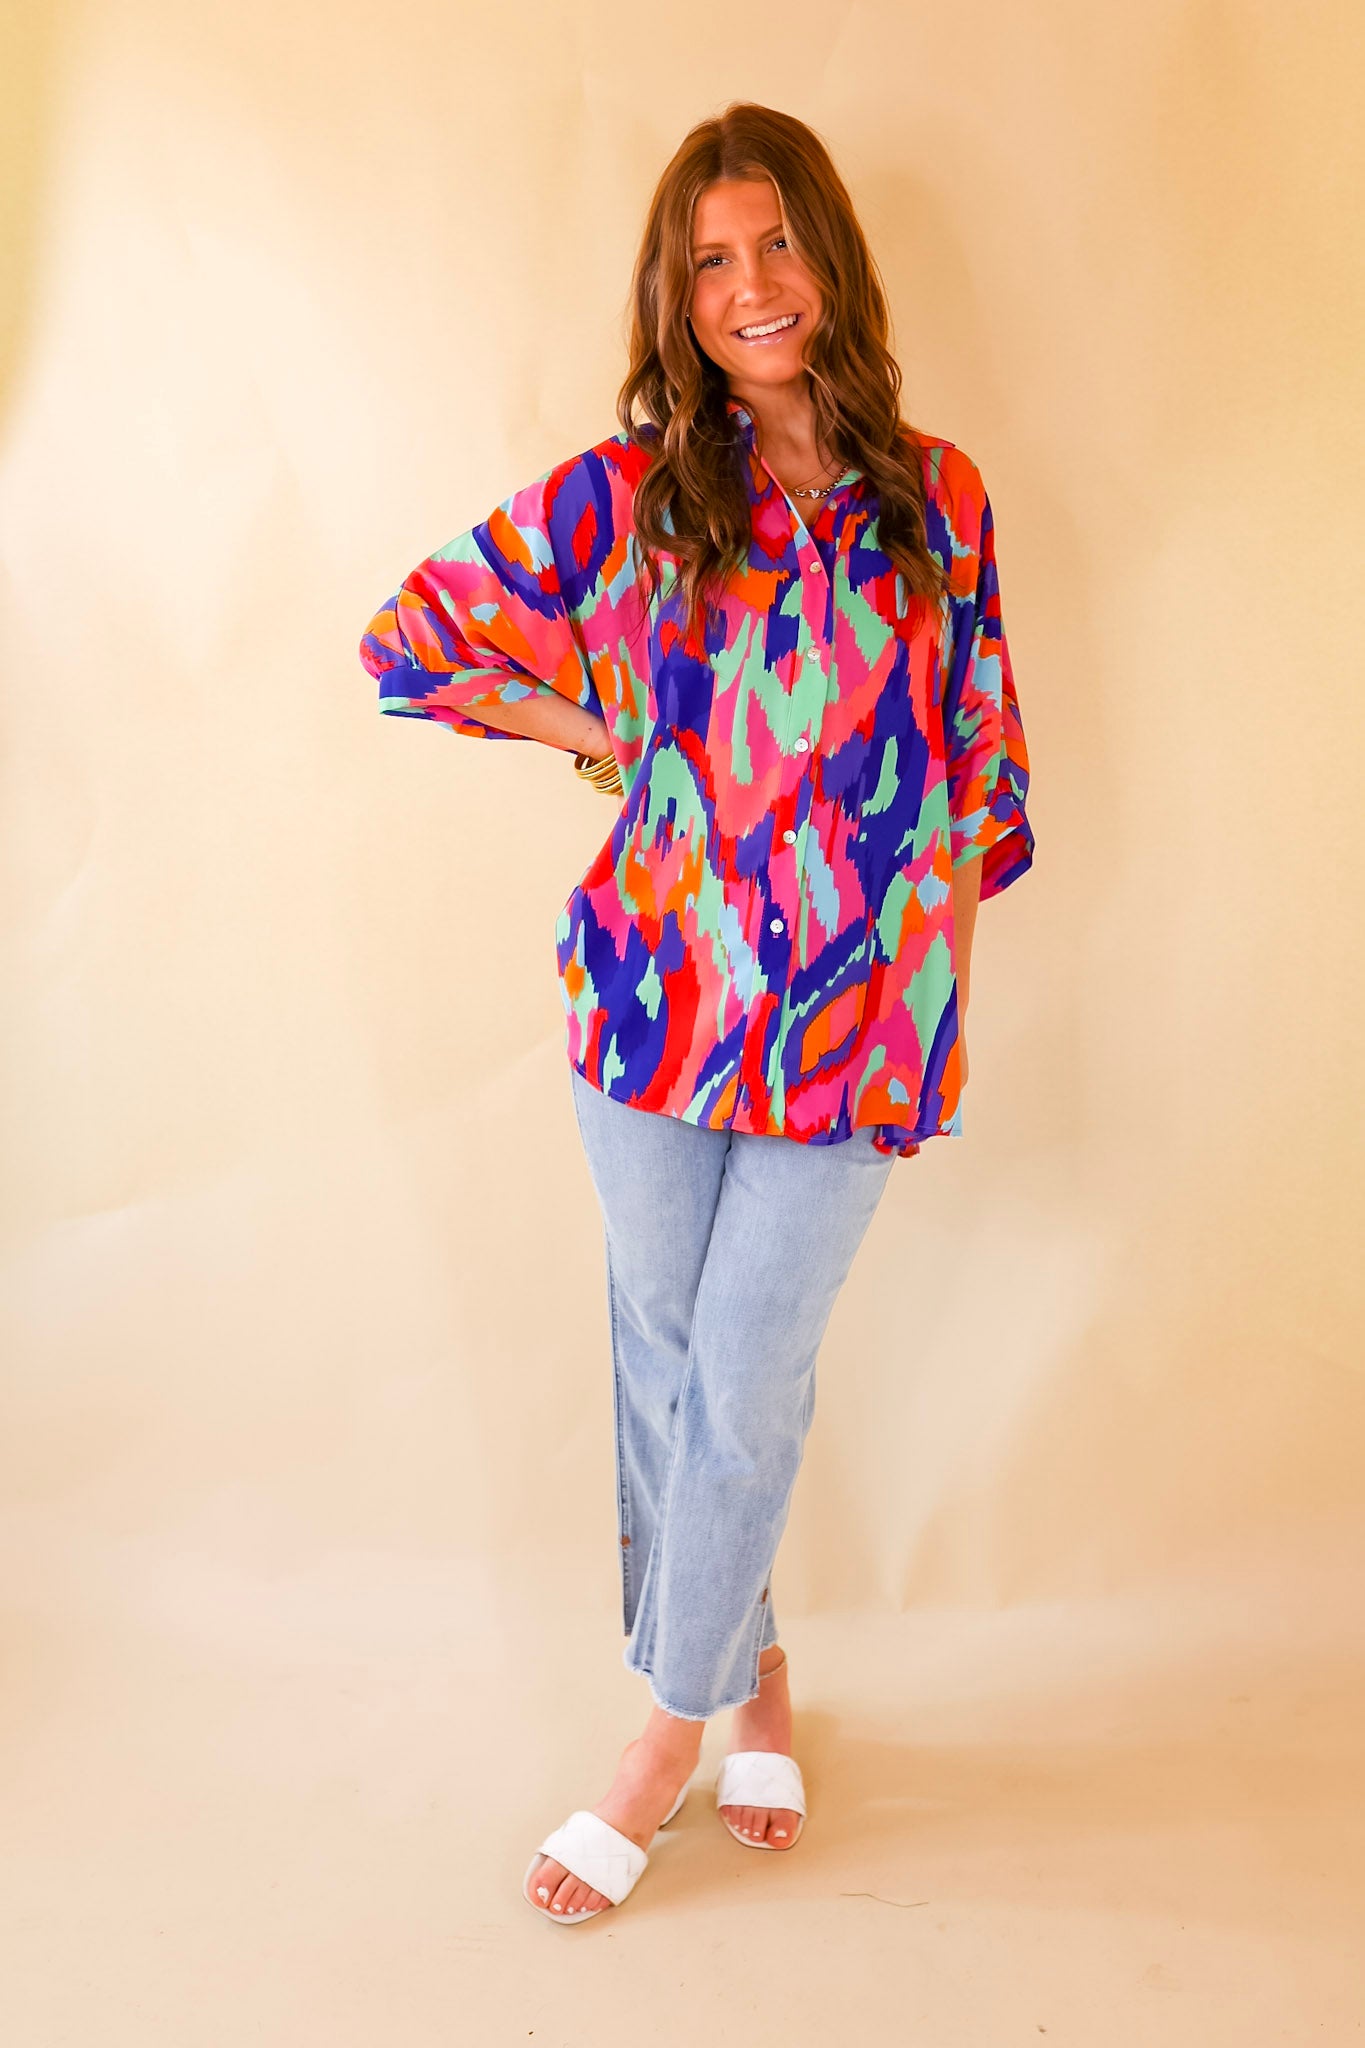 Sophisticated Sweetie Button Up Brush Stroke Print Poncho Top in Blue Mix - Giddy Up Glamour Boutique